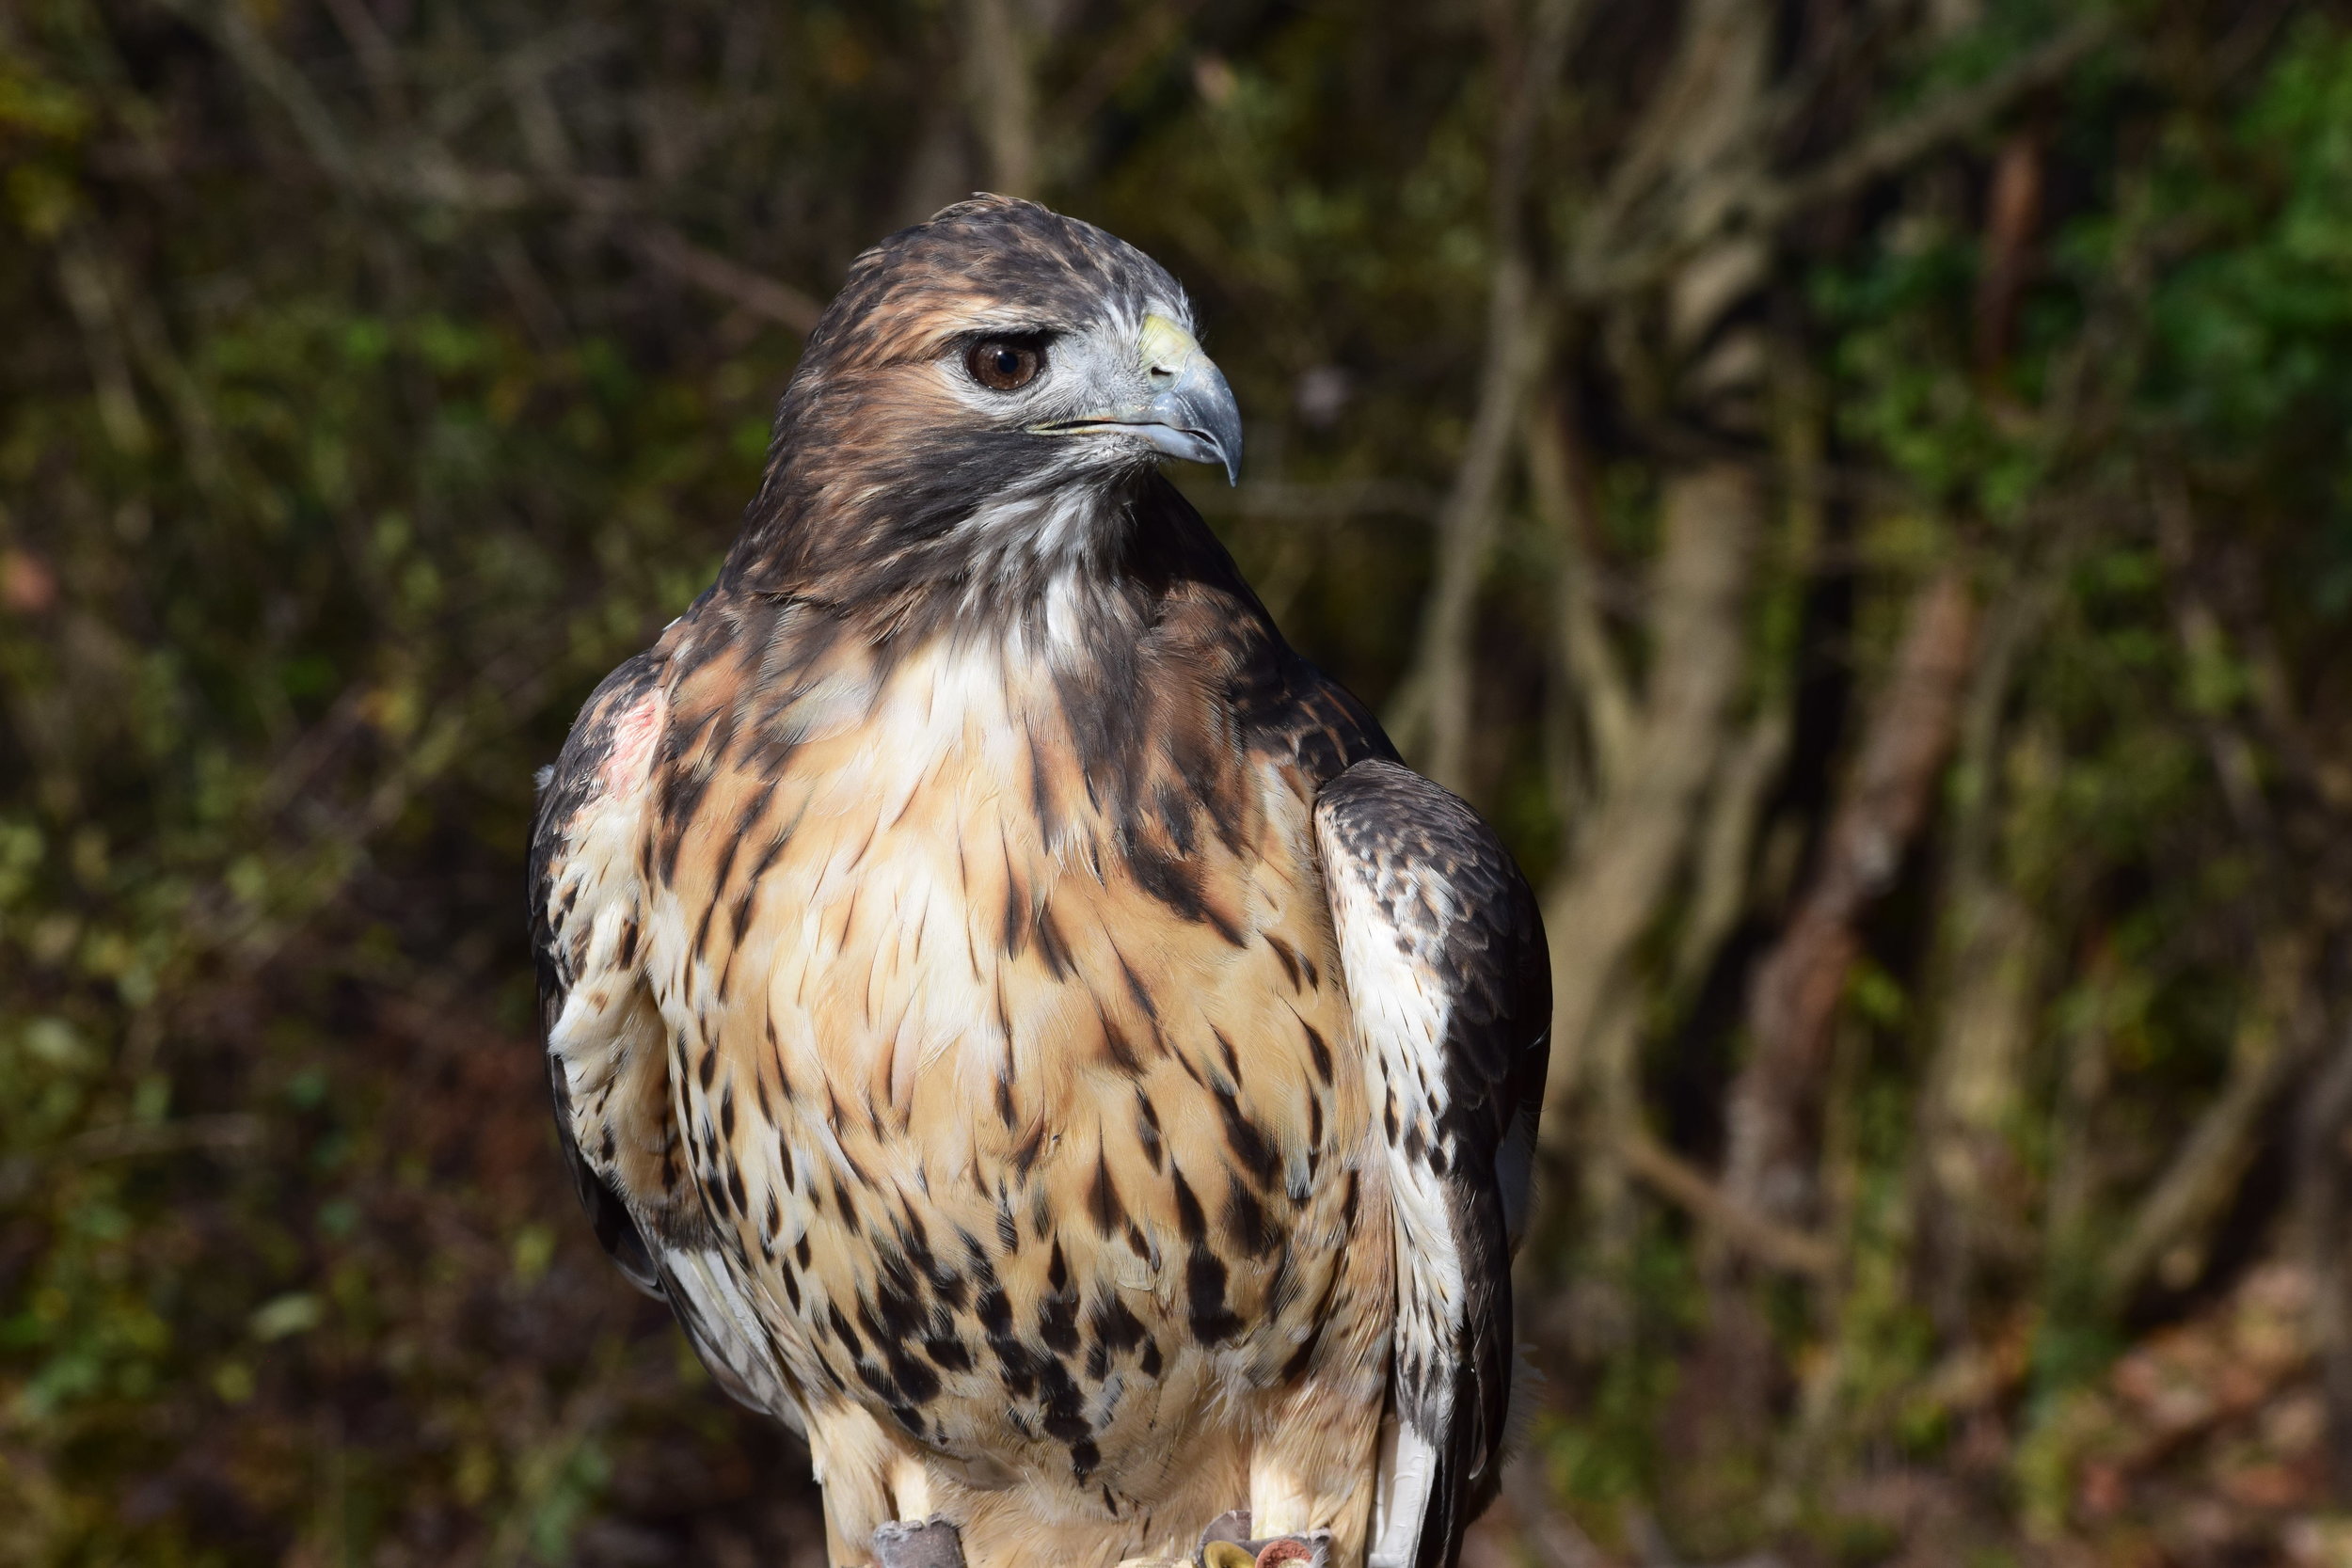 Calli, the Red-Tailed Hawk (Raptor Center resident)